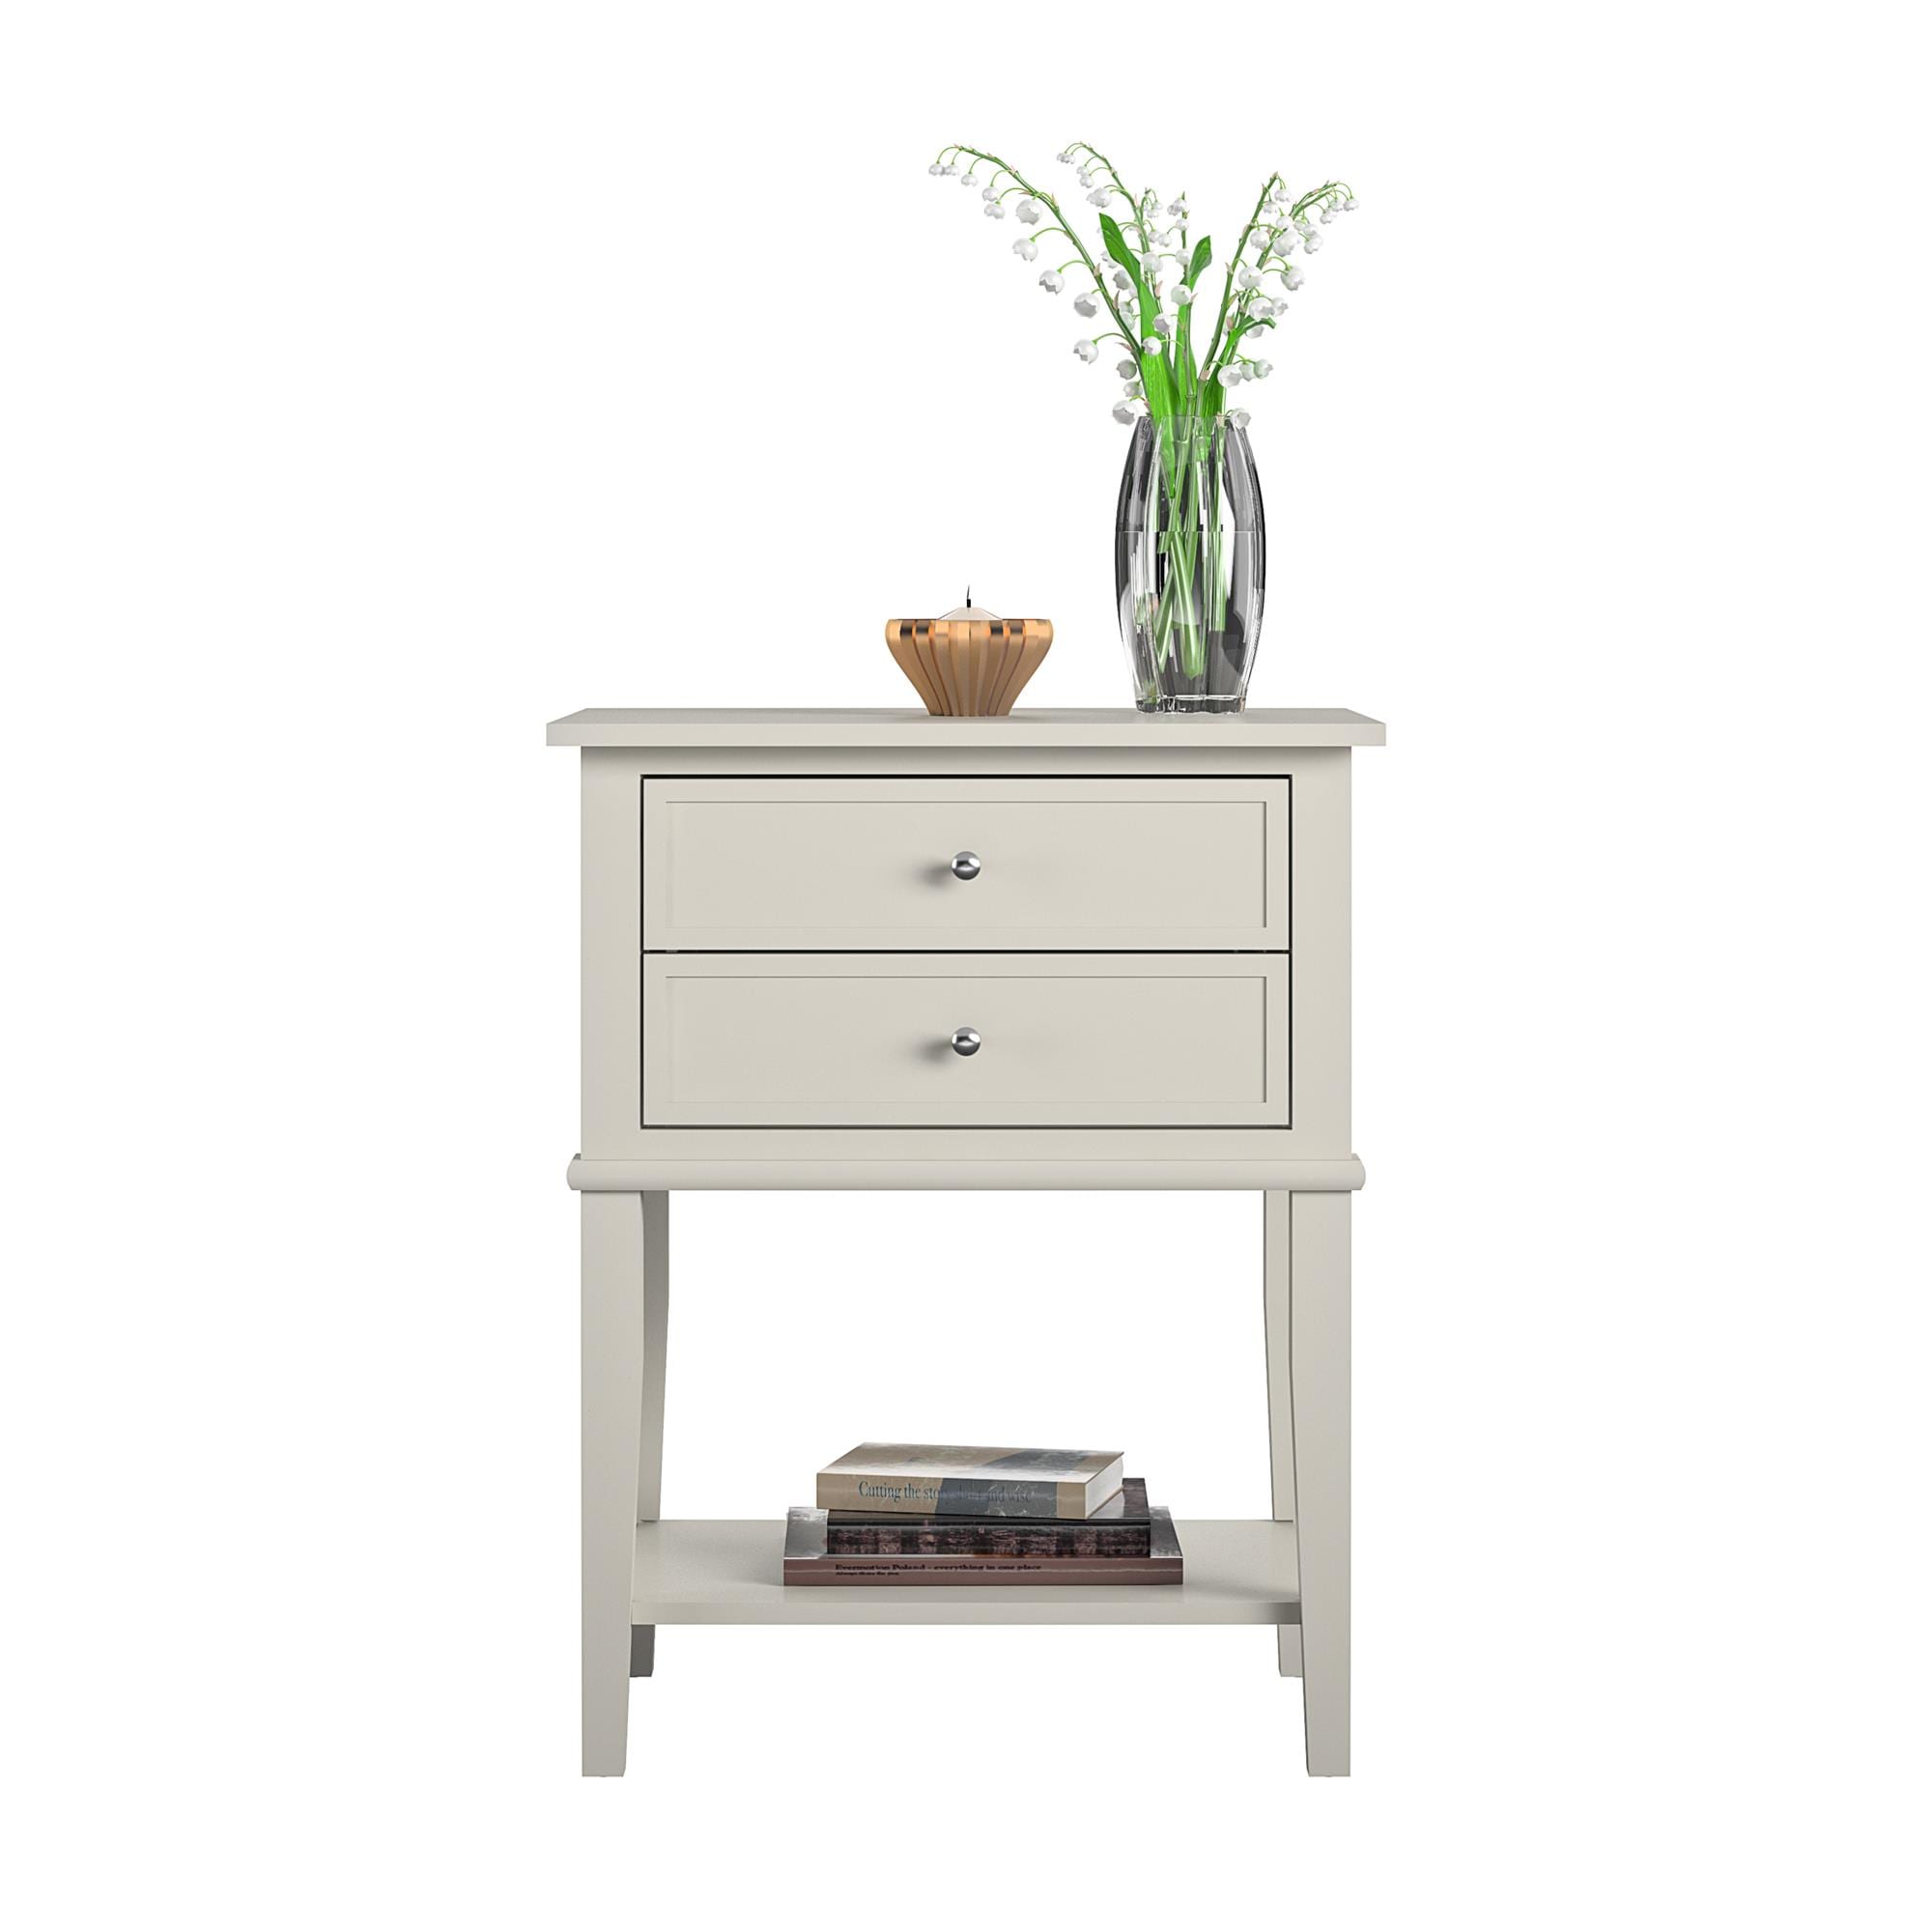 Ameriwood Home Franklin Wooden Accent Table with 2 Drawers in Taupe